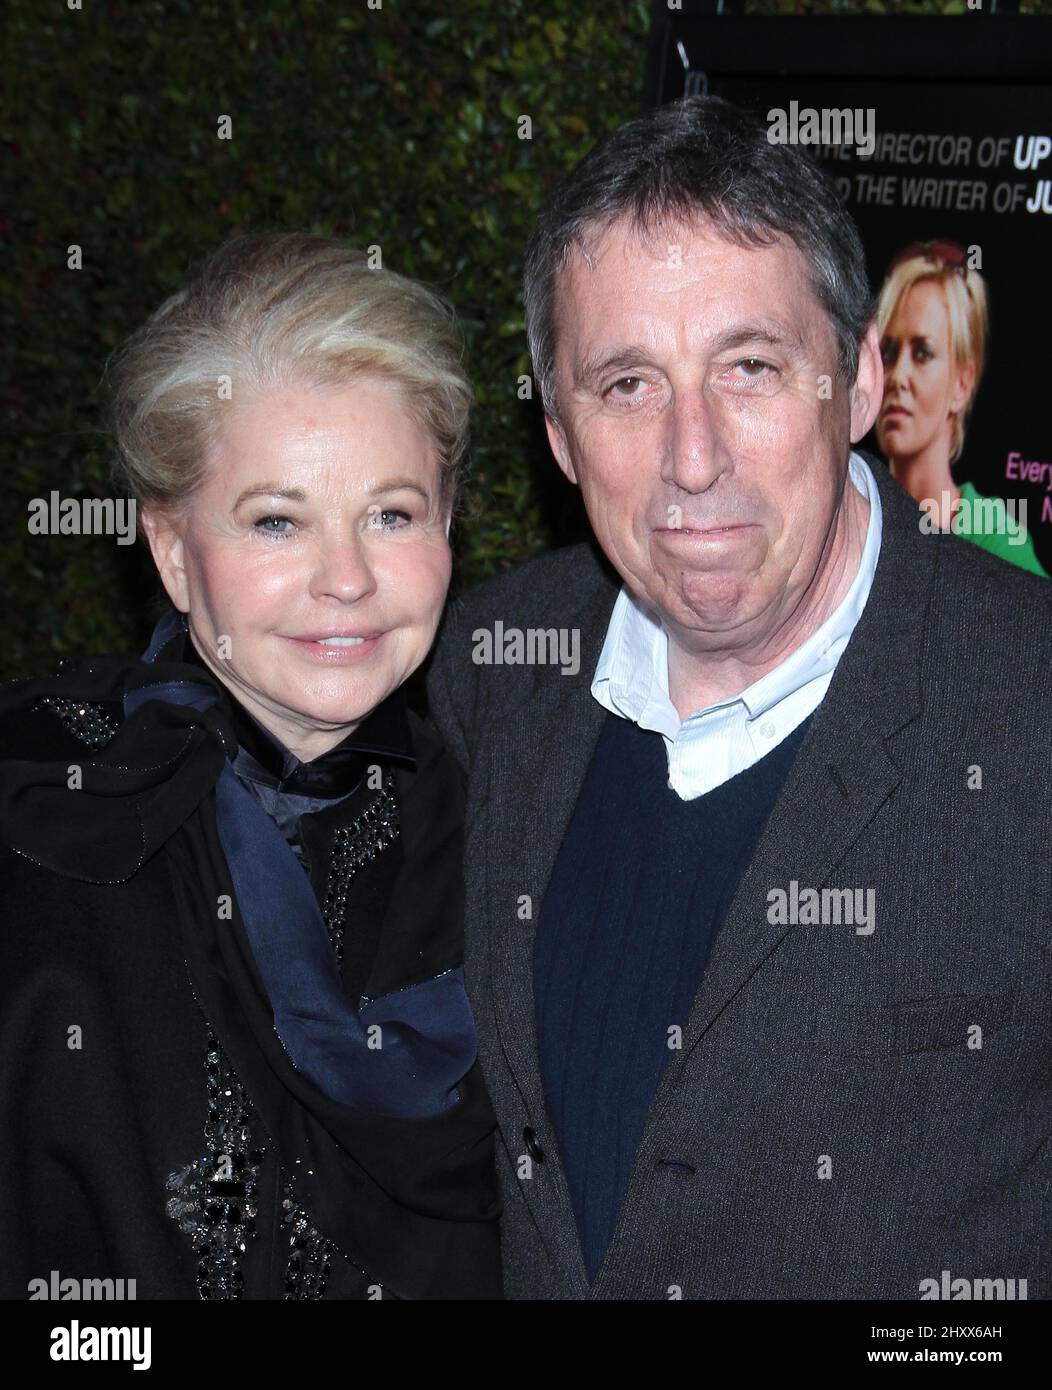 Ivan Reitman and Genevieve Robert at the premiere of Paramount Pictures's 'Young Adult' held at the Academy of Motion Picture Arts and Sciences on December 15, 2011 in Los Angeles, California. Stock Photo